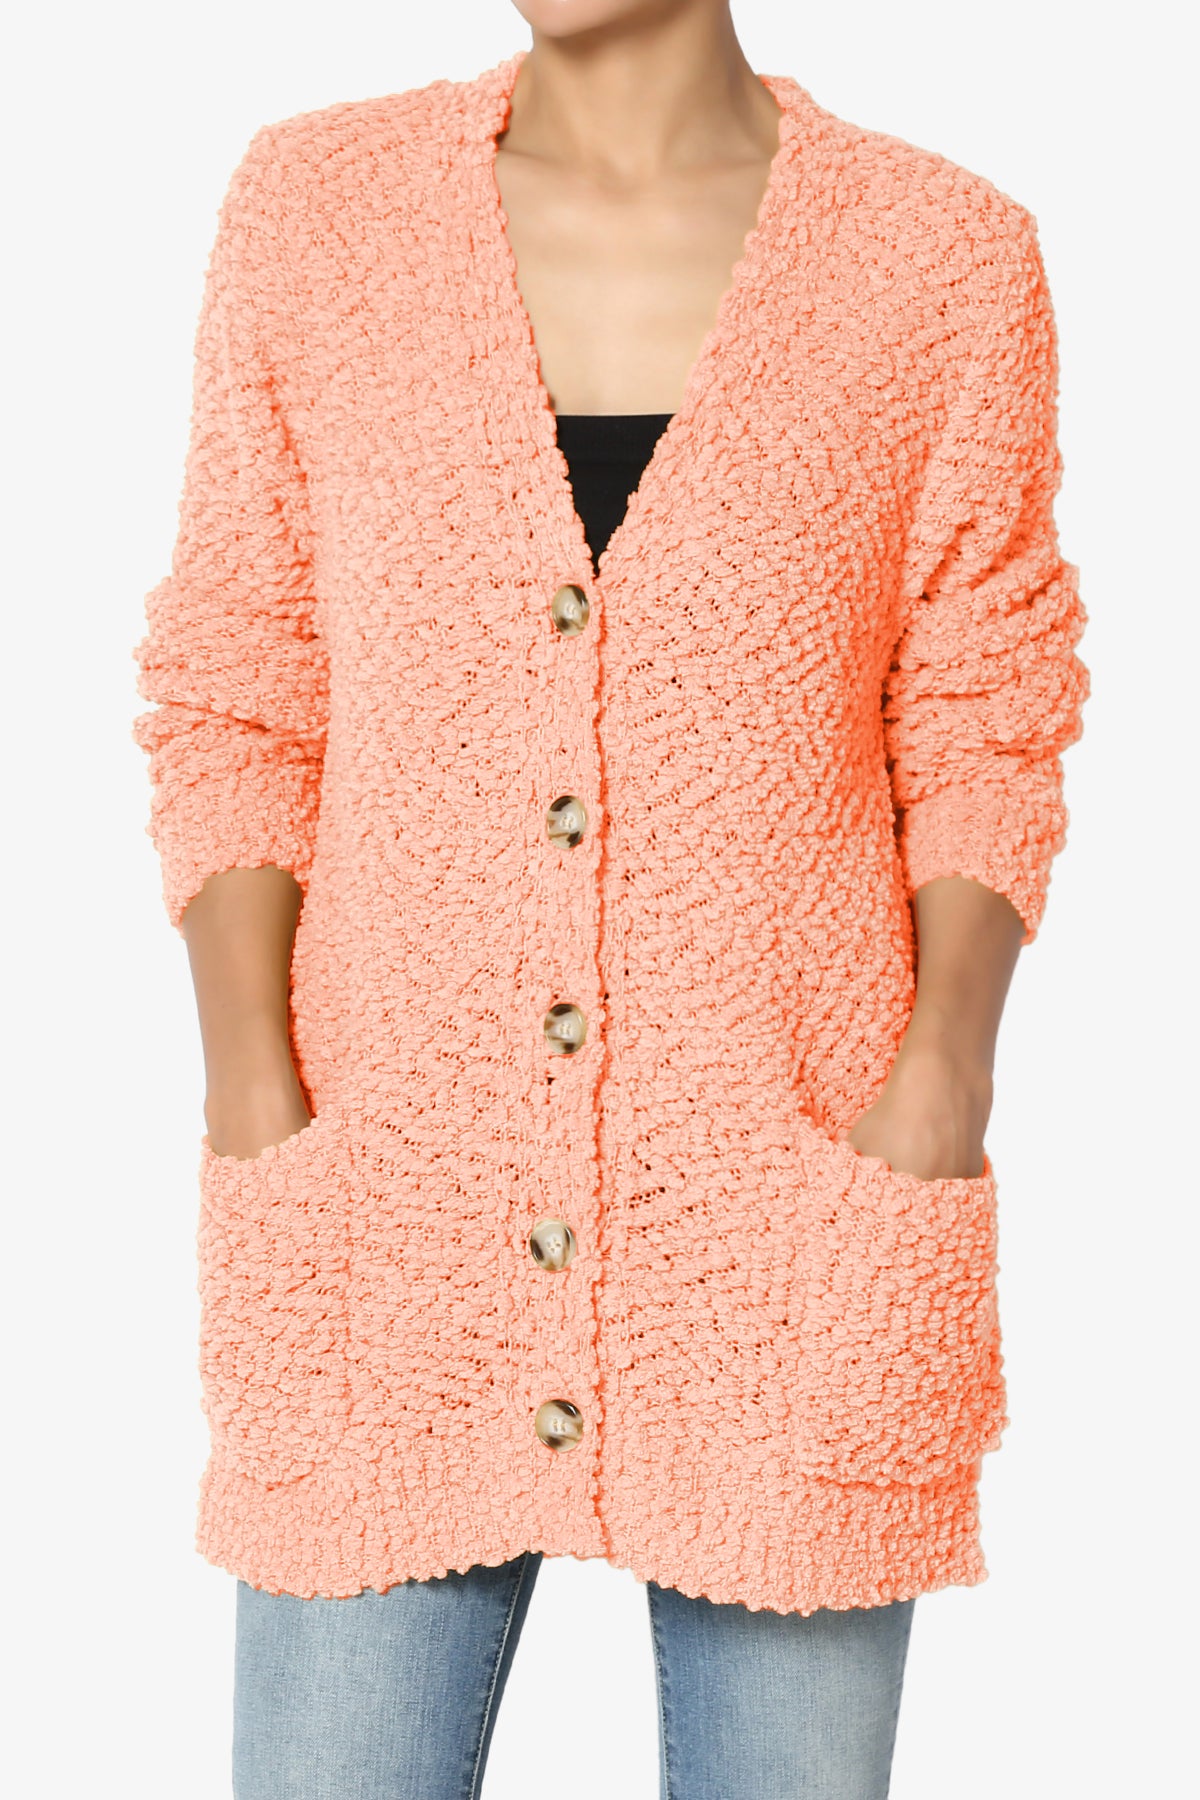 Barry Button Teddy Knit Sweater Cardigan CORAL_1